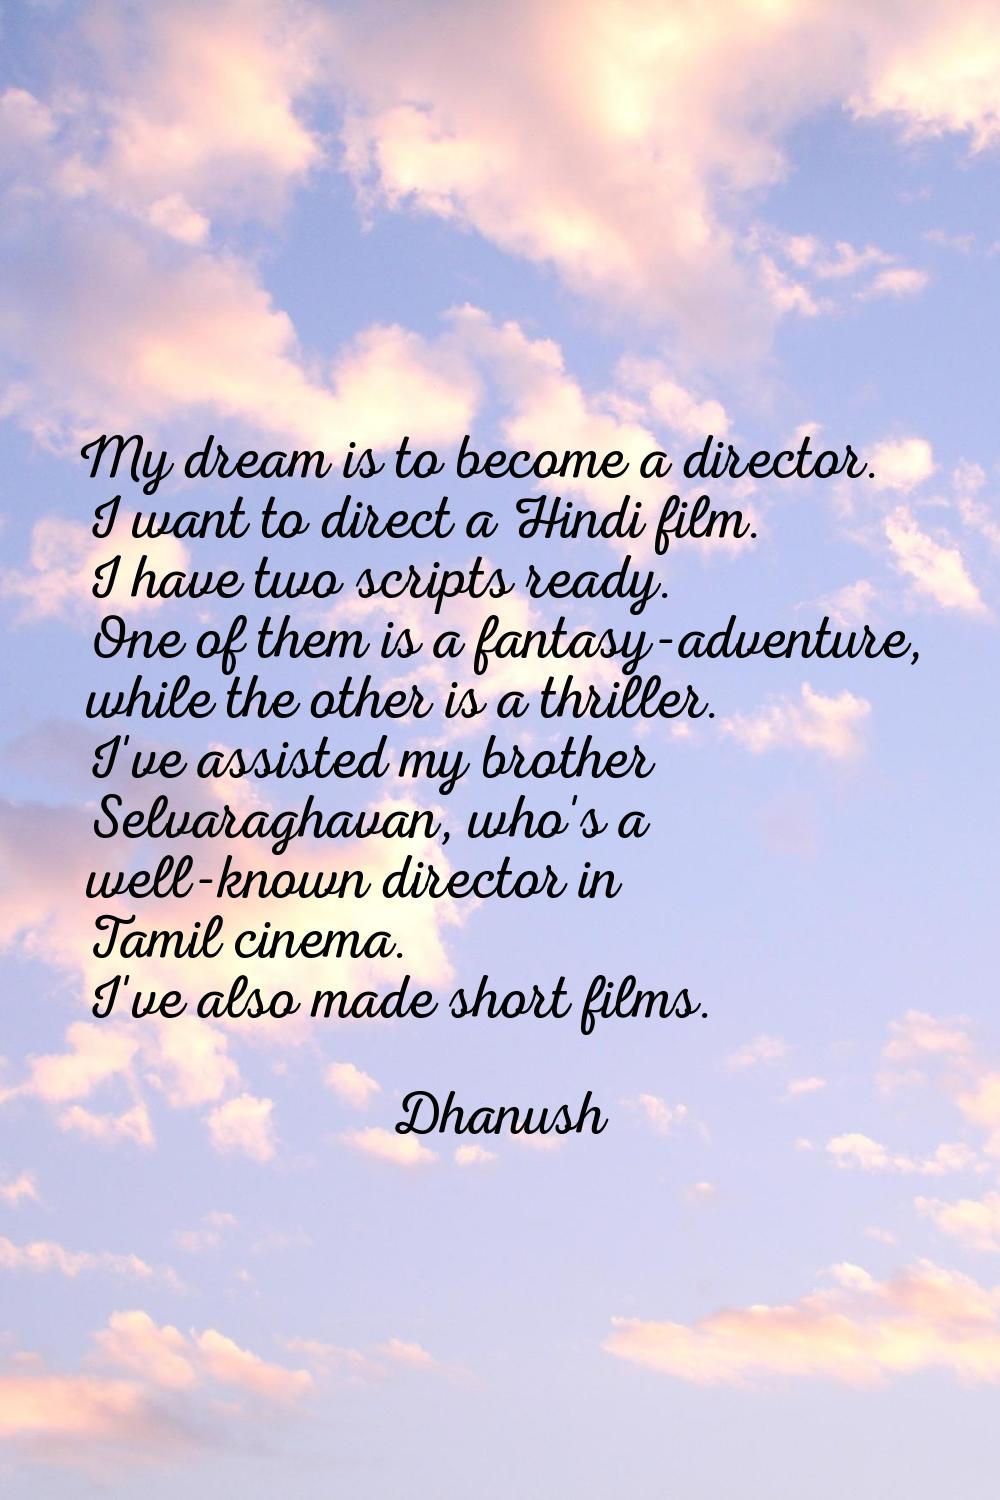 My dream is to become a director. I want to direct a Hindi film. I have two scripts ready. One of t